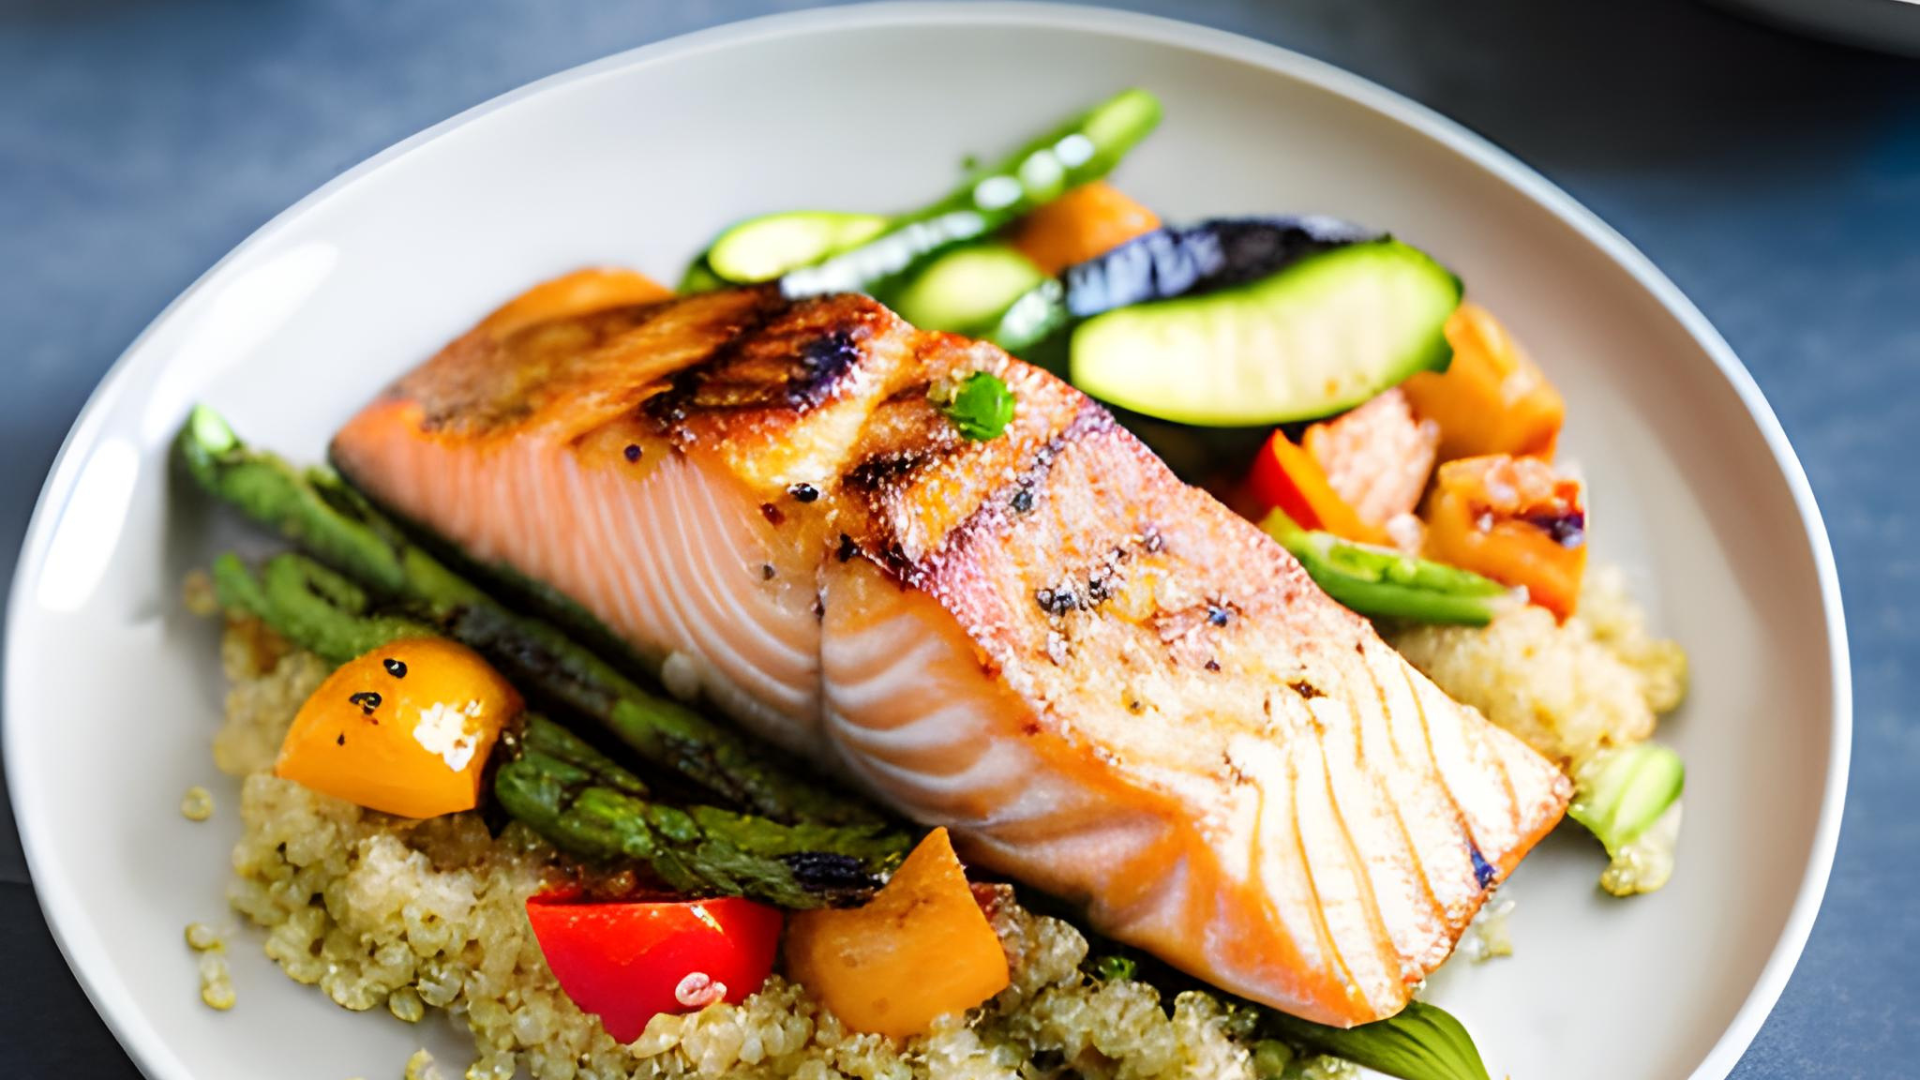 Grilled Salmon with Quinoa and Roasted Vegetables